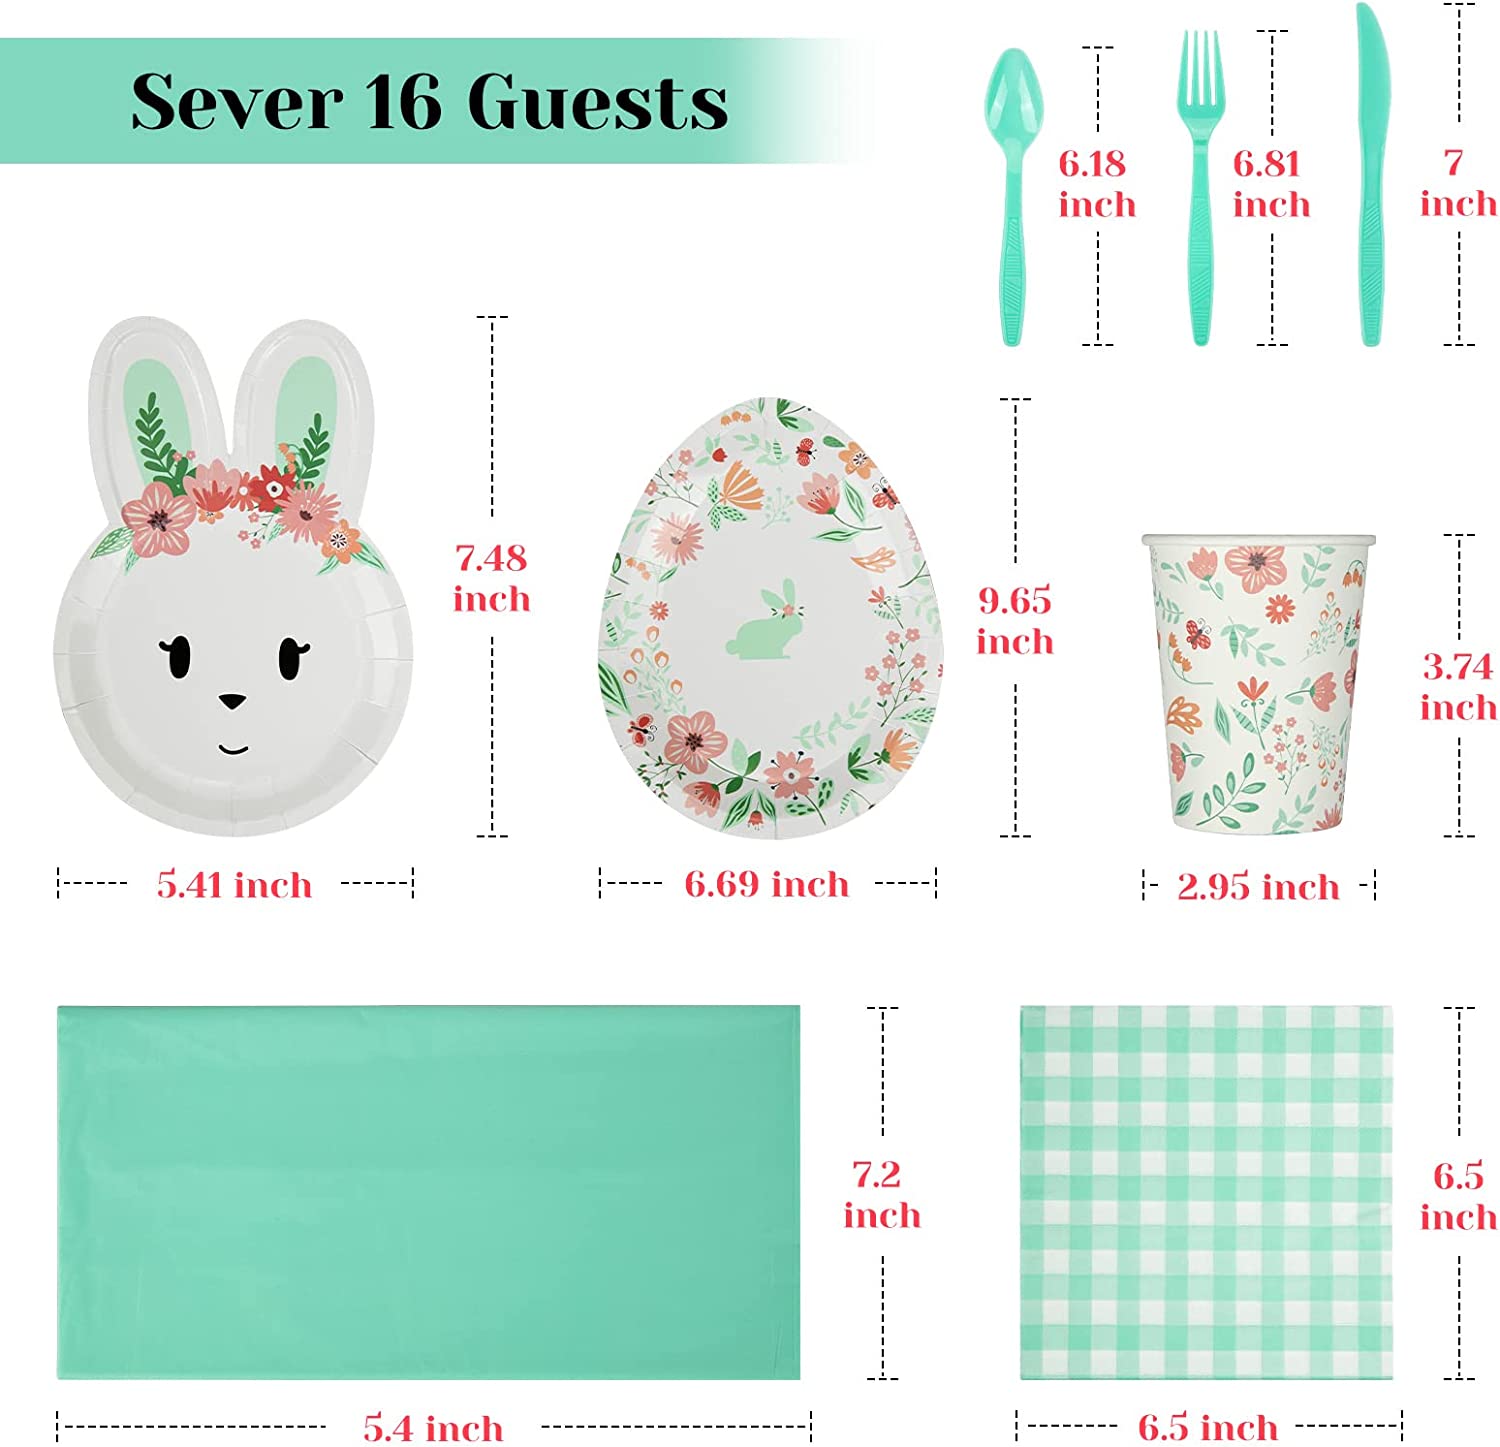 Fashionwu 117 Pcs Easter Disposable Dinnerware Set, Easter Green Decorations Paper Plates, Service for 16 Easter Party Supplies Includes Plates Cups Knives Forks Spoons Napkins Tablecloth - image 4 of 9